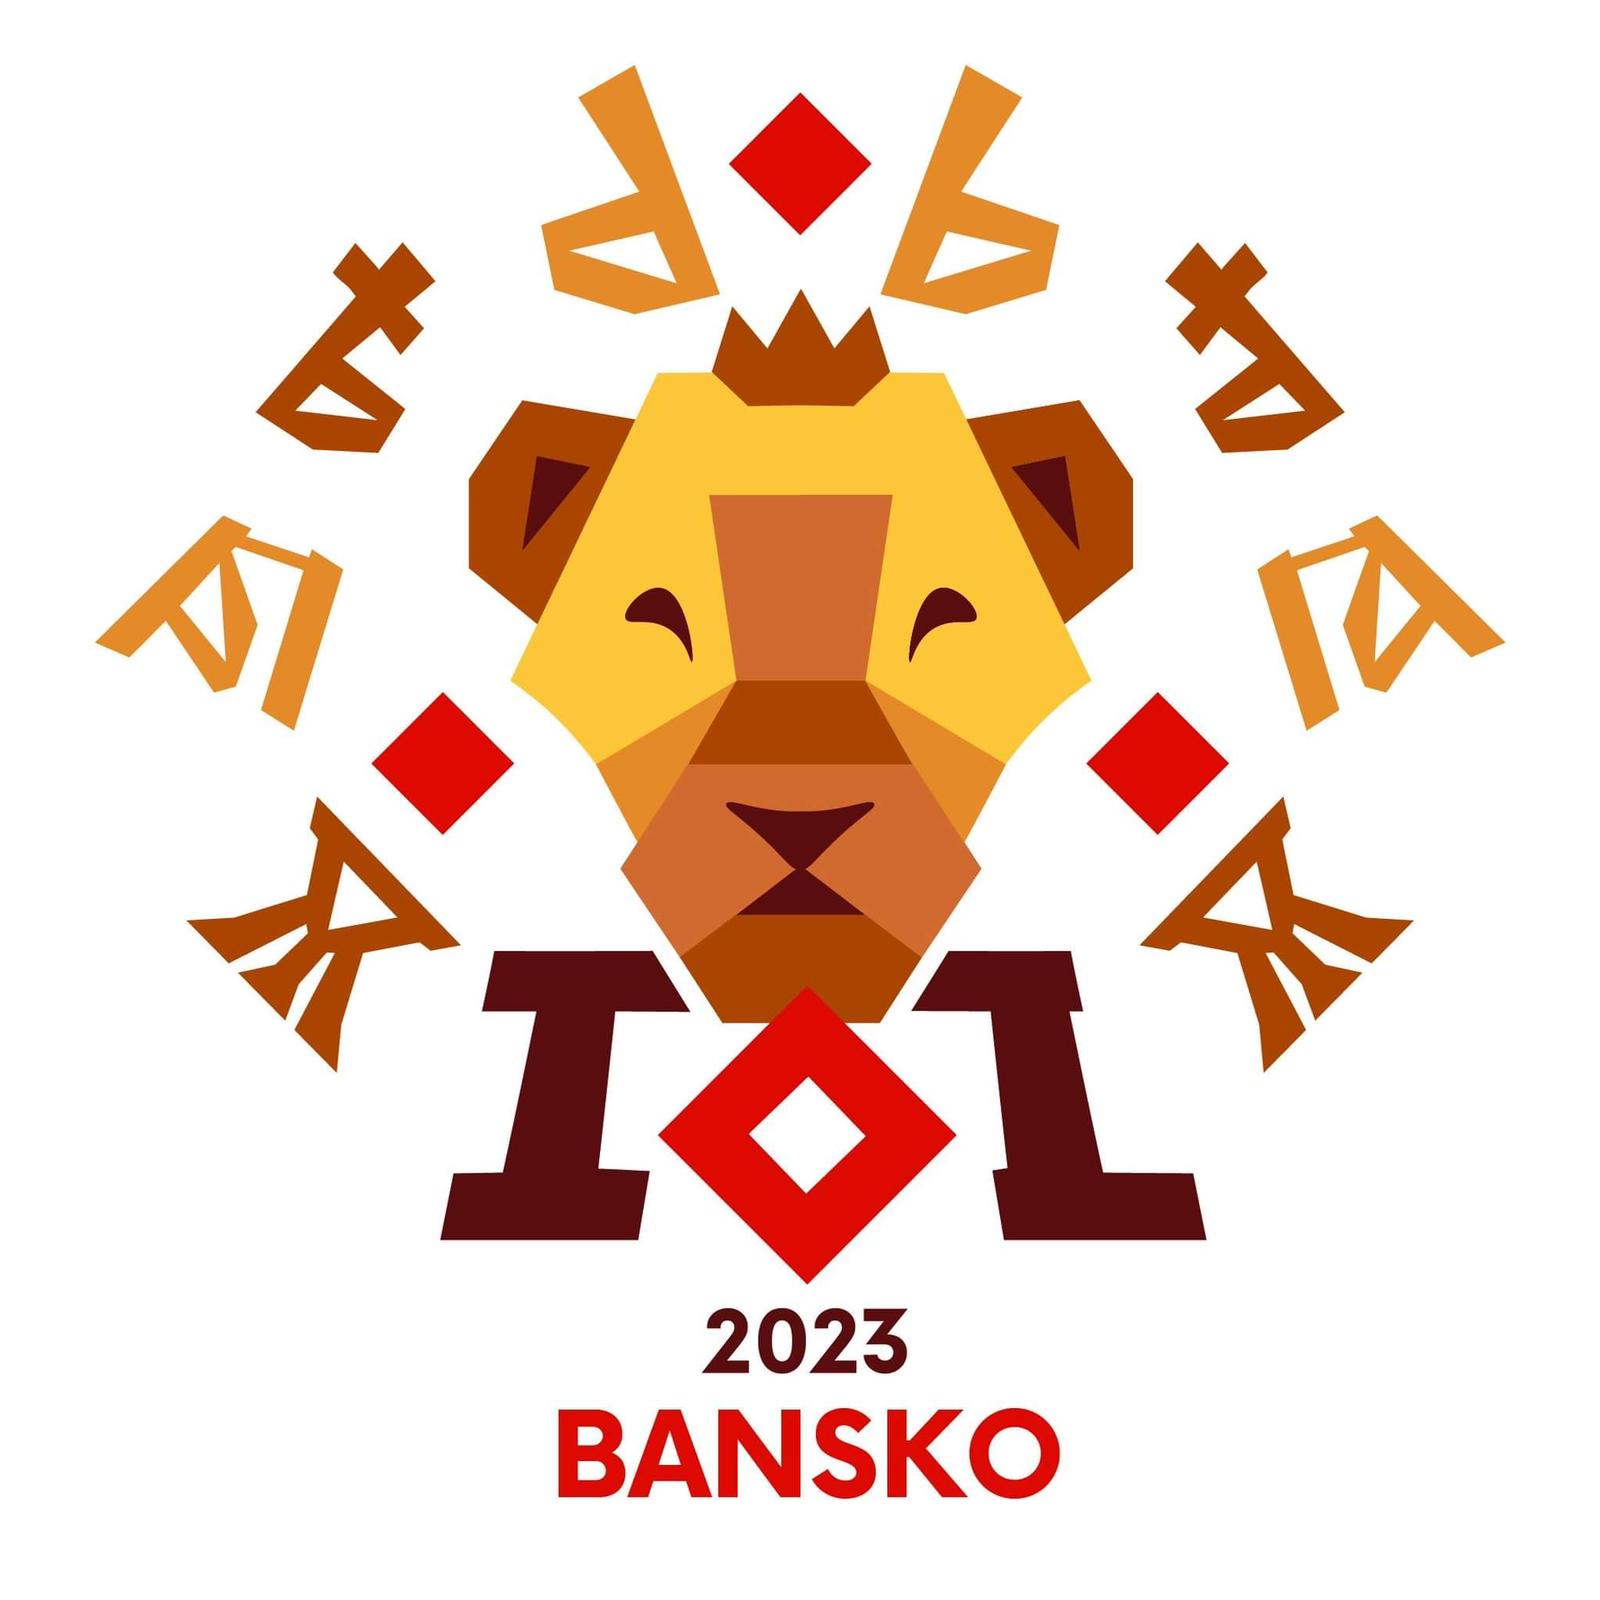 Yellow and brown bear surrounded by yellow and brown linguistic characters and red diamonds. Below the bear's face are the letters IOL 2023 Bansko. This is the logo for the 2023 International Linguistics Olympiad which takes place in July in Bansko, Bulgaria.